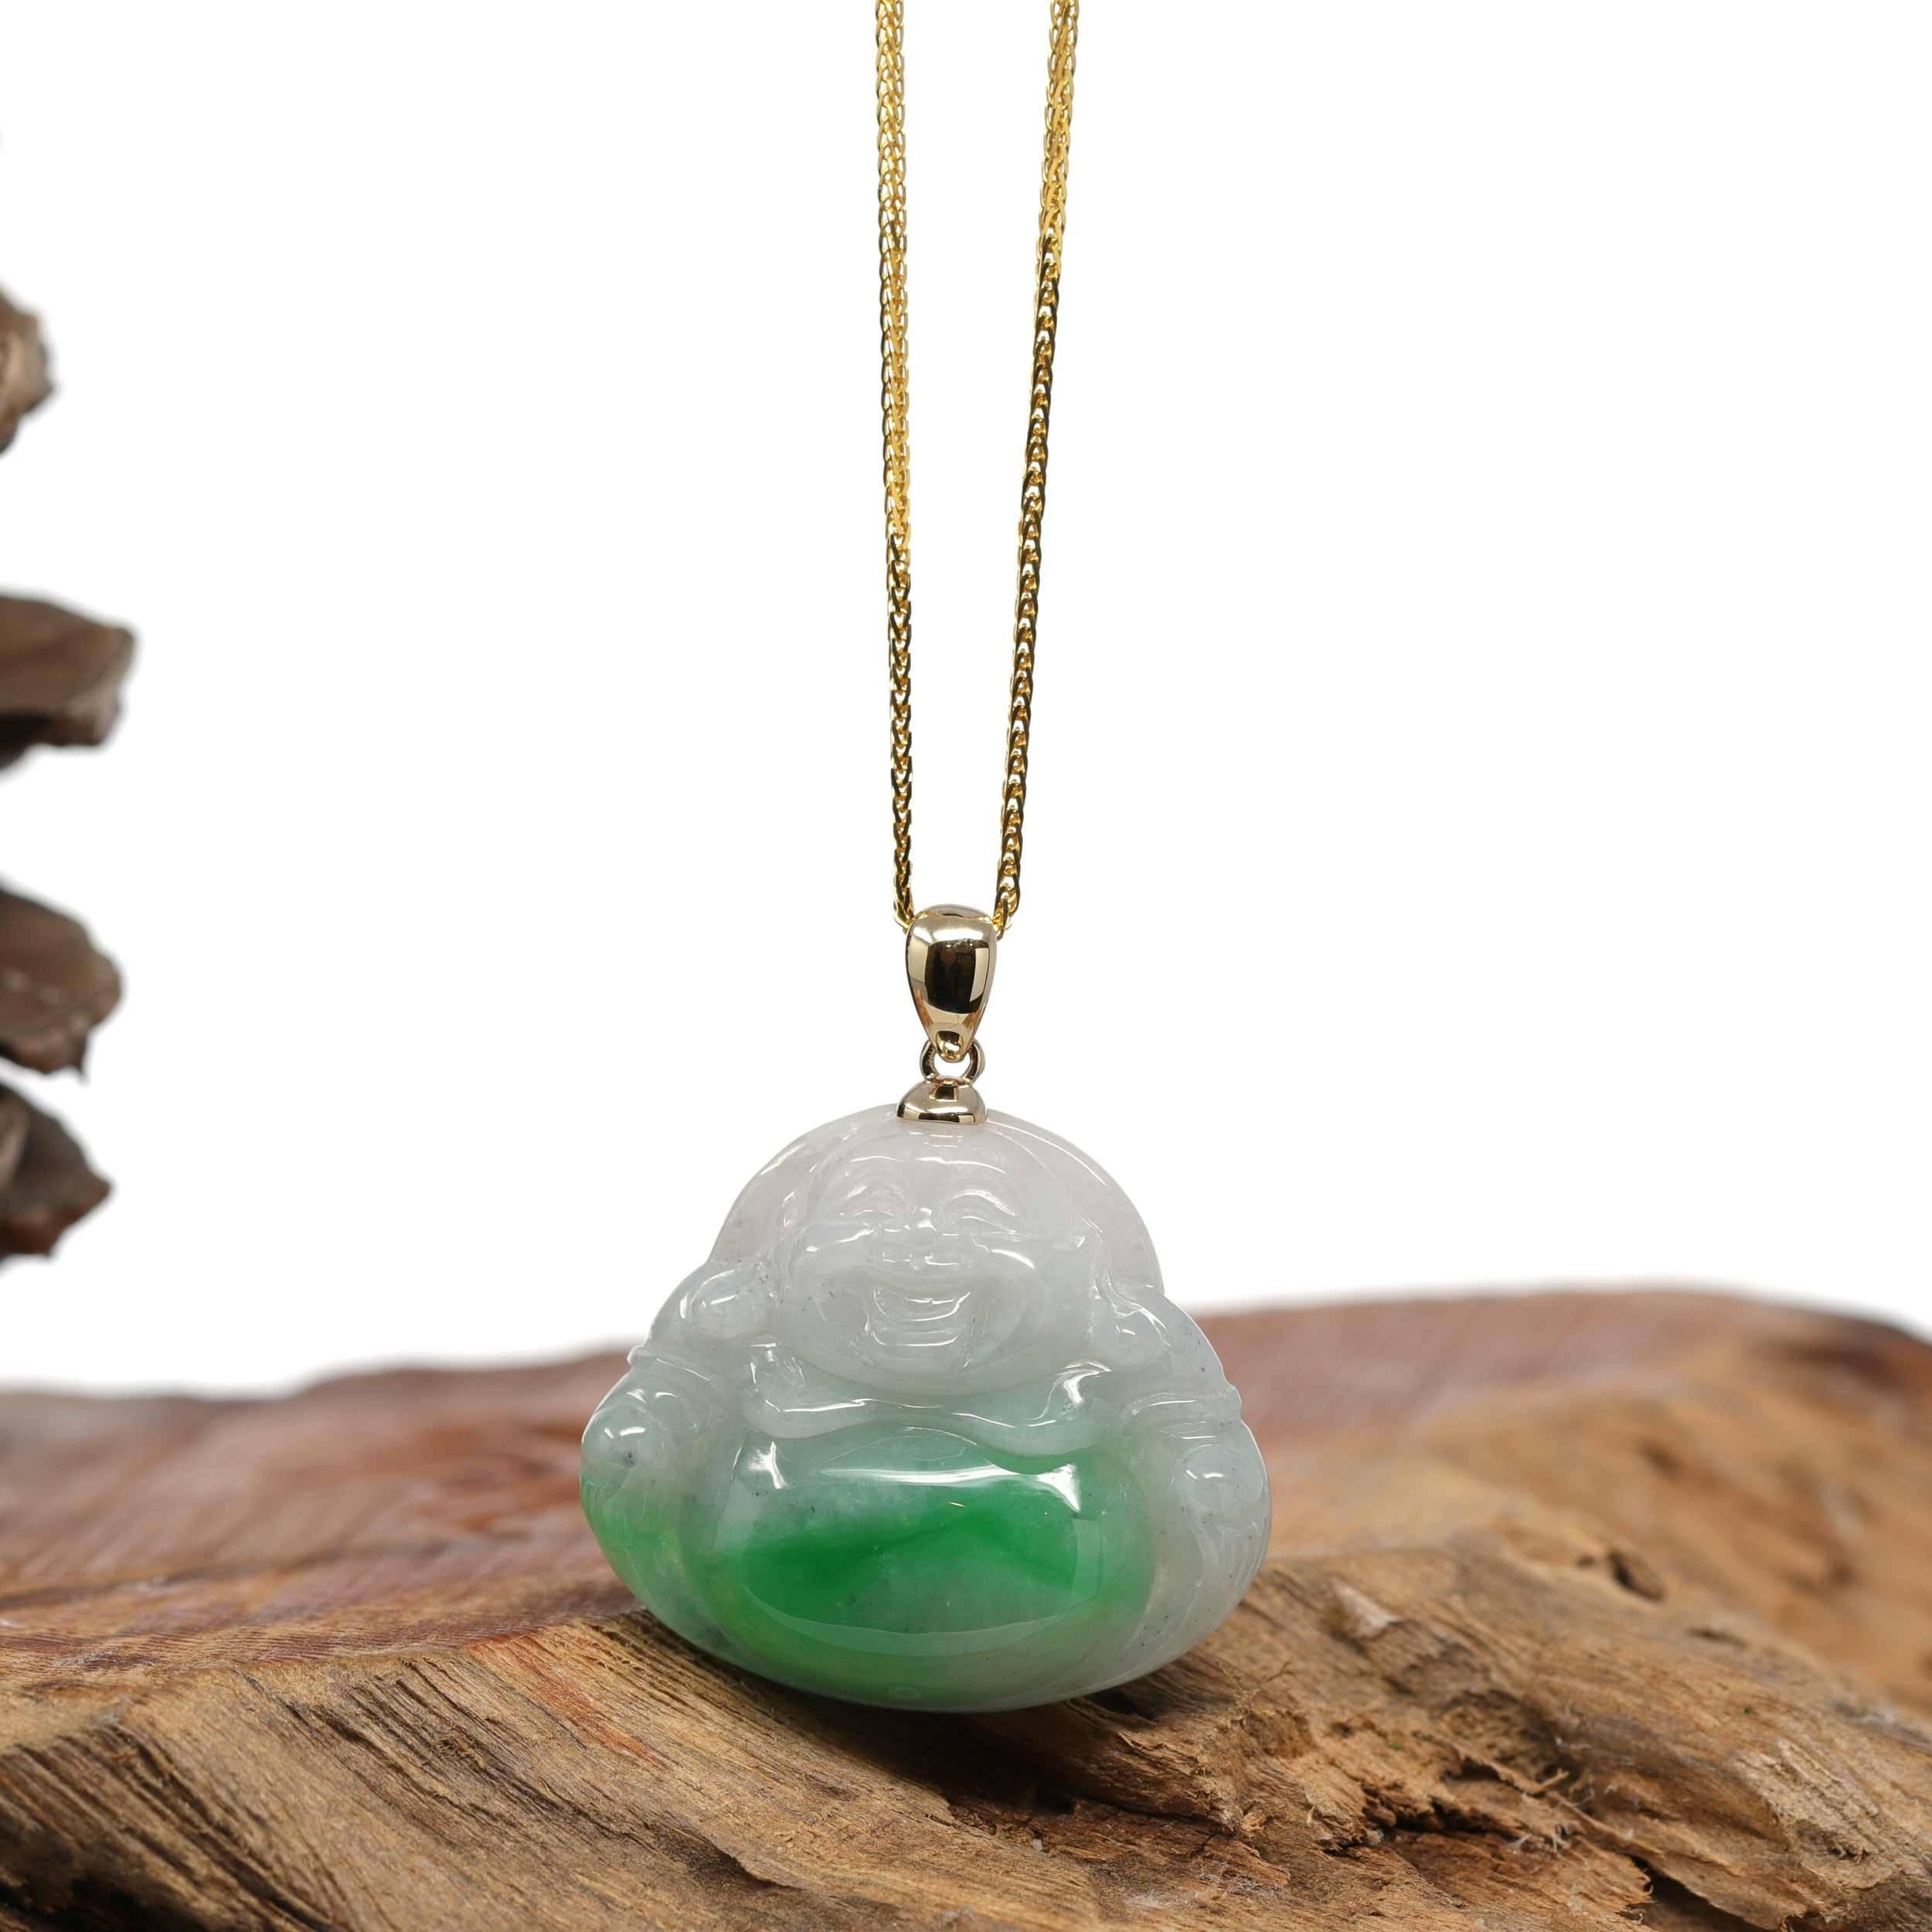 "Laughing Buddha" Rich Green Jadeite Jade Necklace with 14k Yellow Gold Bail